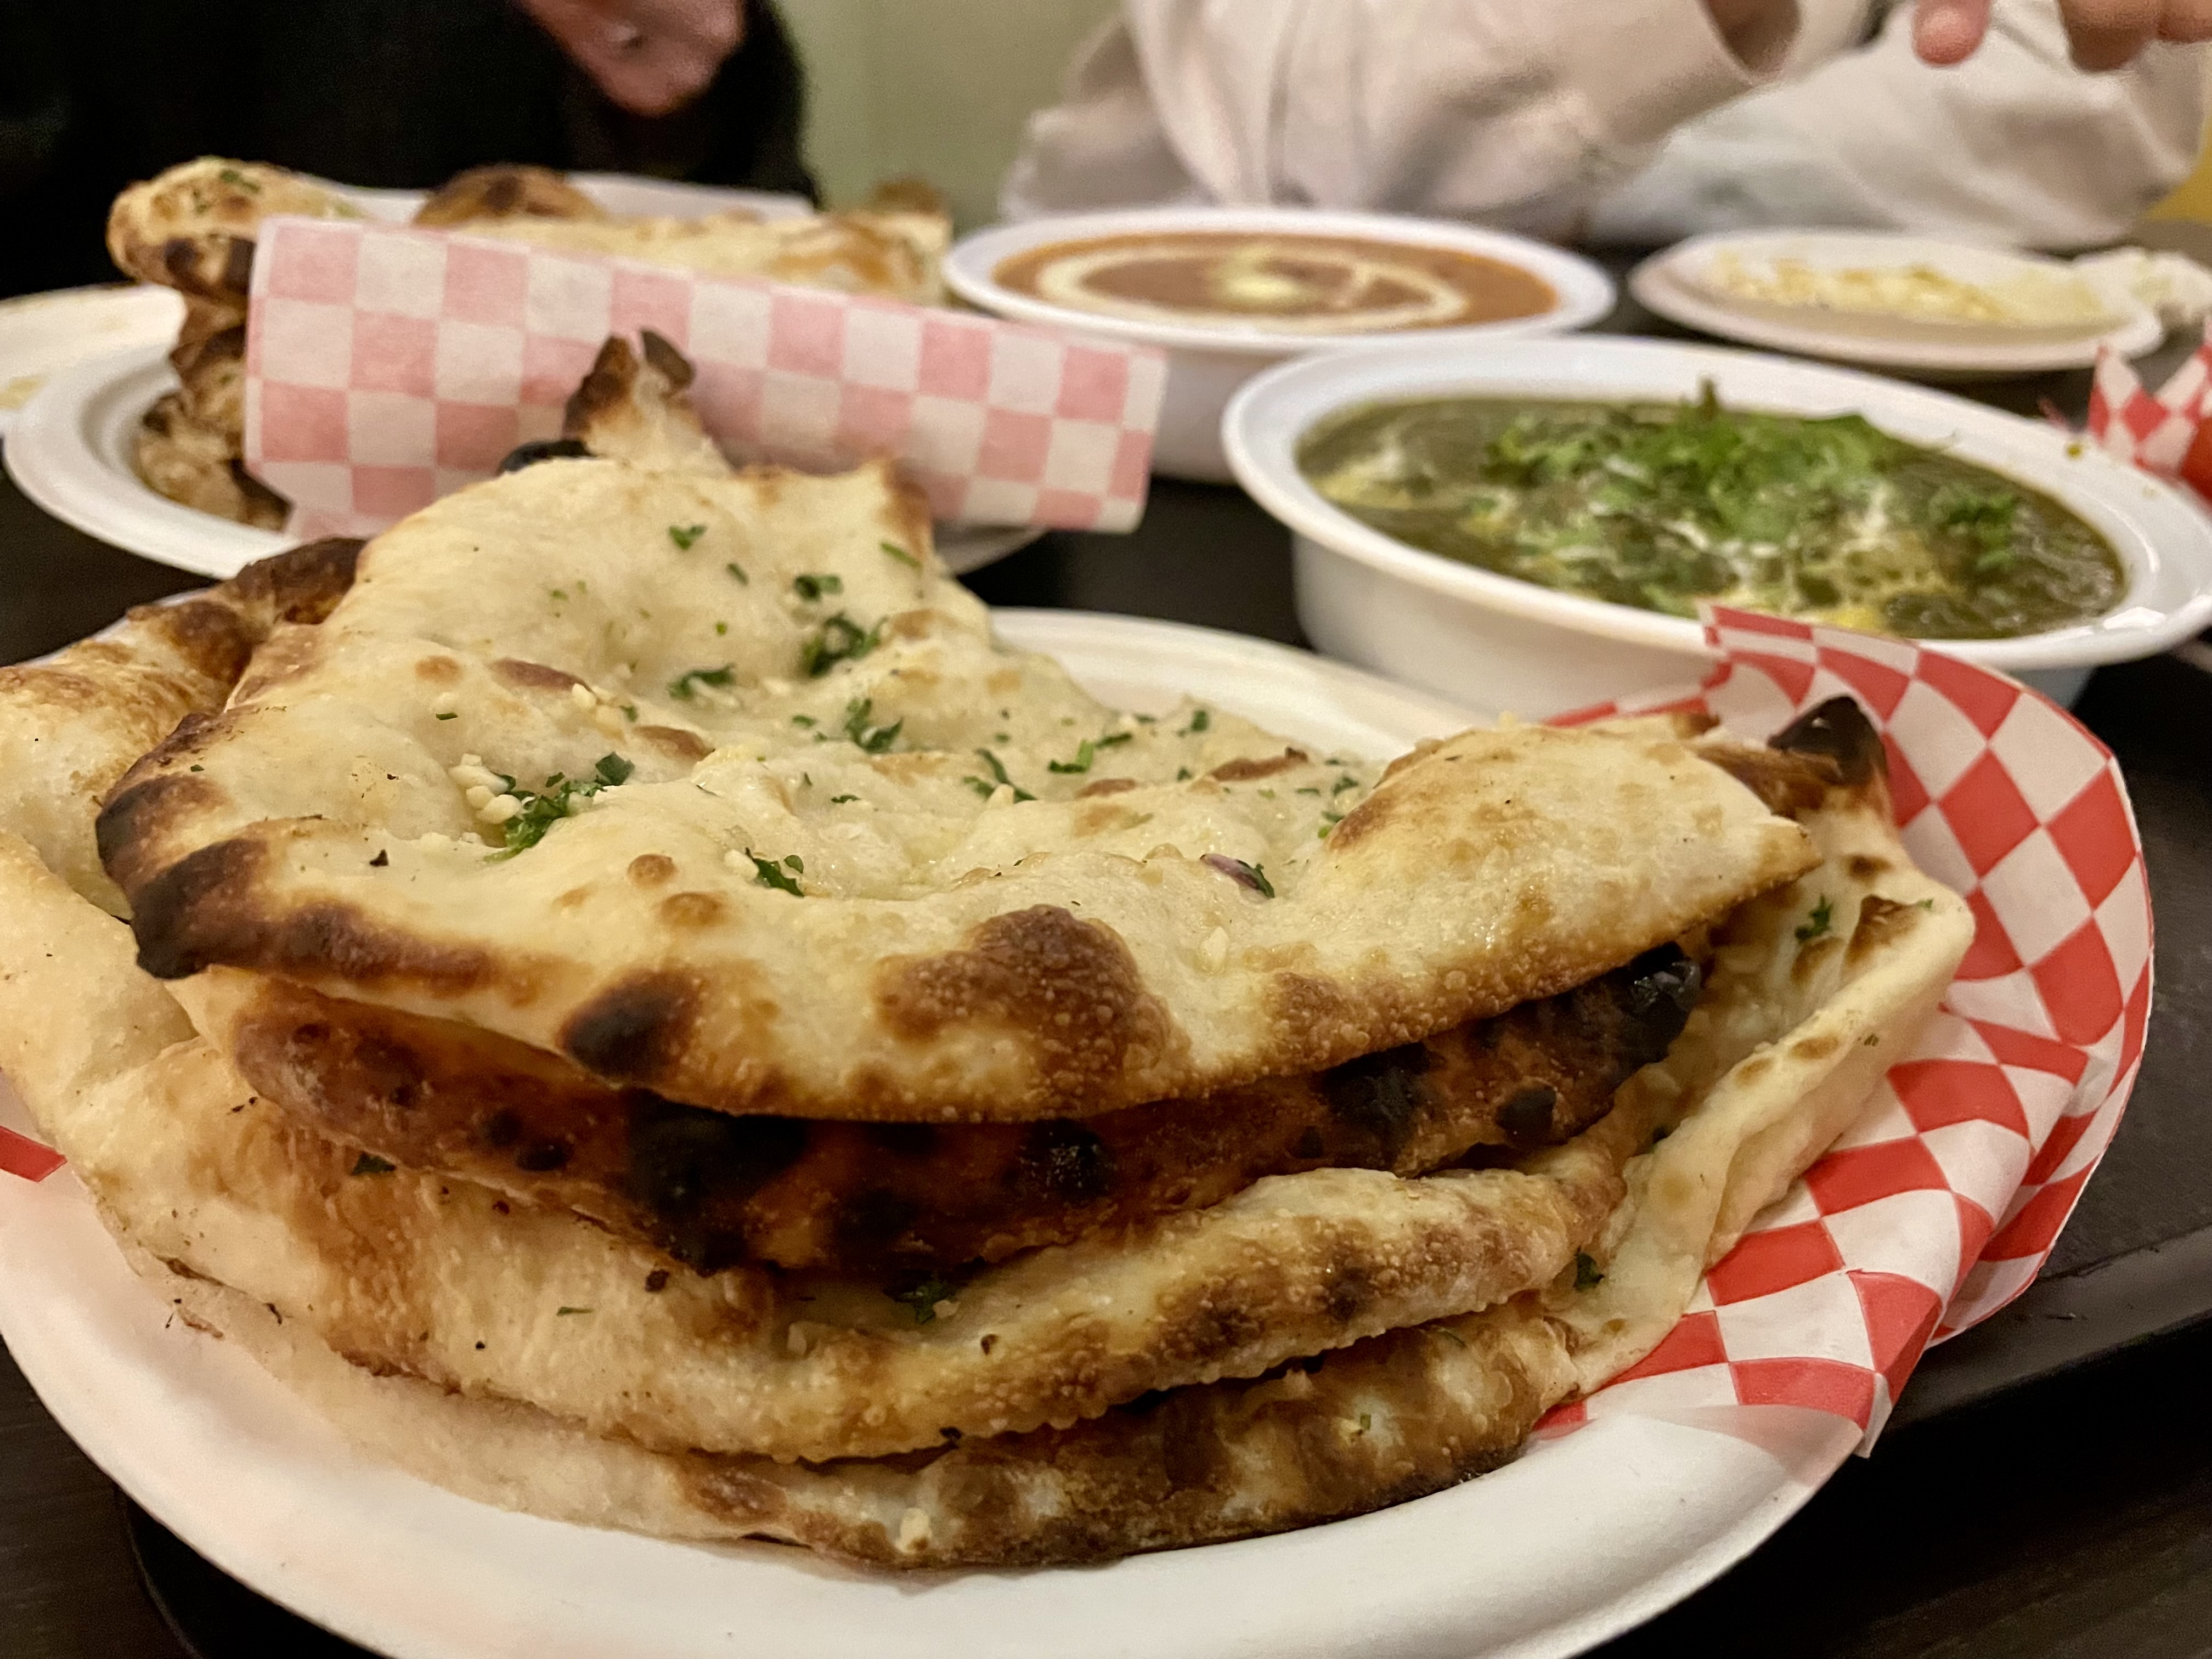 We ordered a large range of Punjabi and North Indian dishes, including the pictured garlic naan, which was served warm and soft